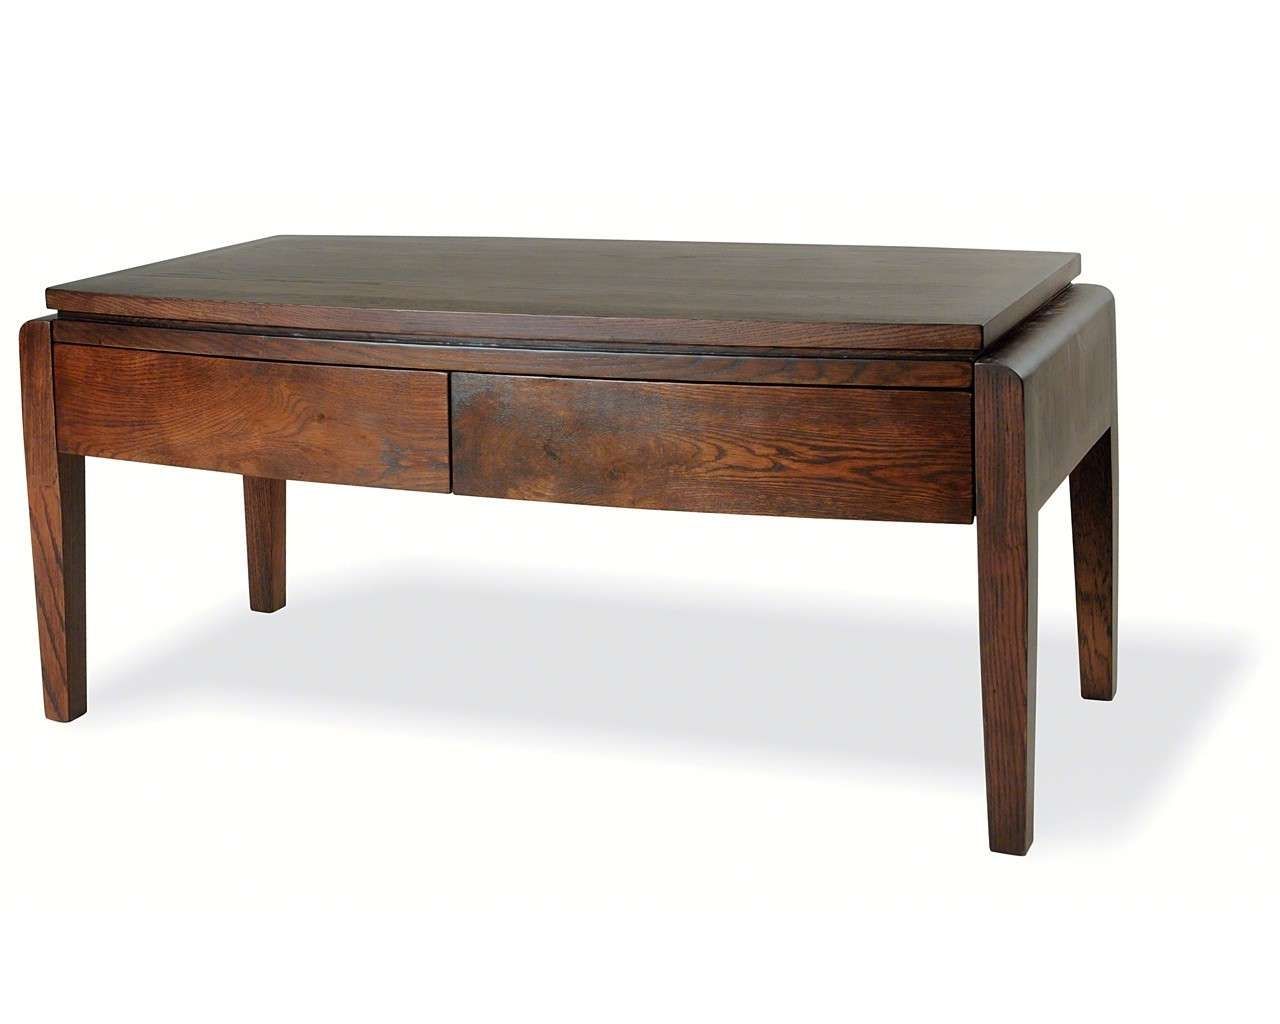 Tuscany Dark Oak Coffee Table Dark Wood Oval Coffee Tables Pertaining To Newest Dark Oak Coffee Tables (View 3 of 20)